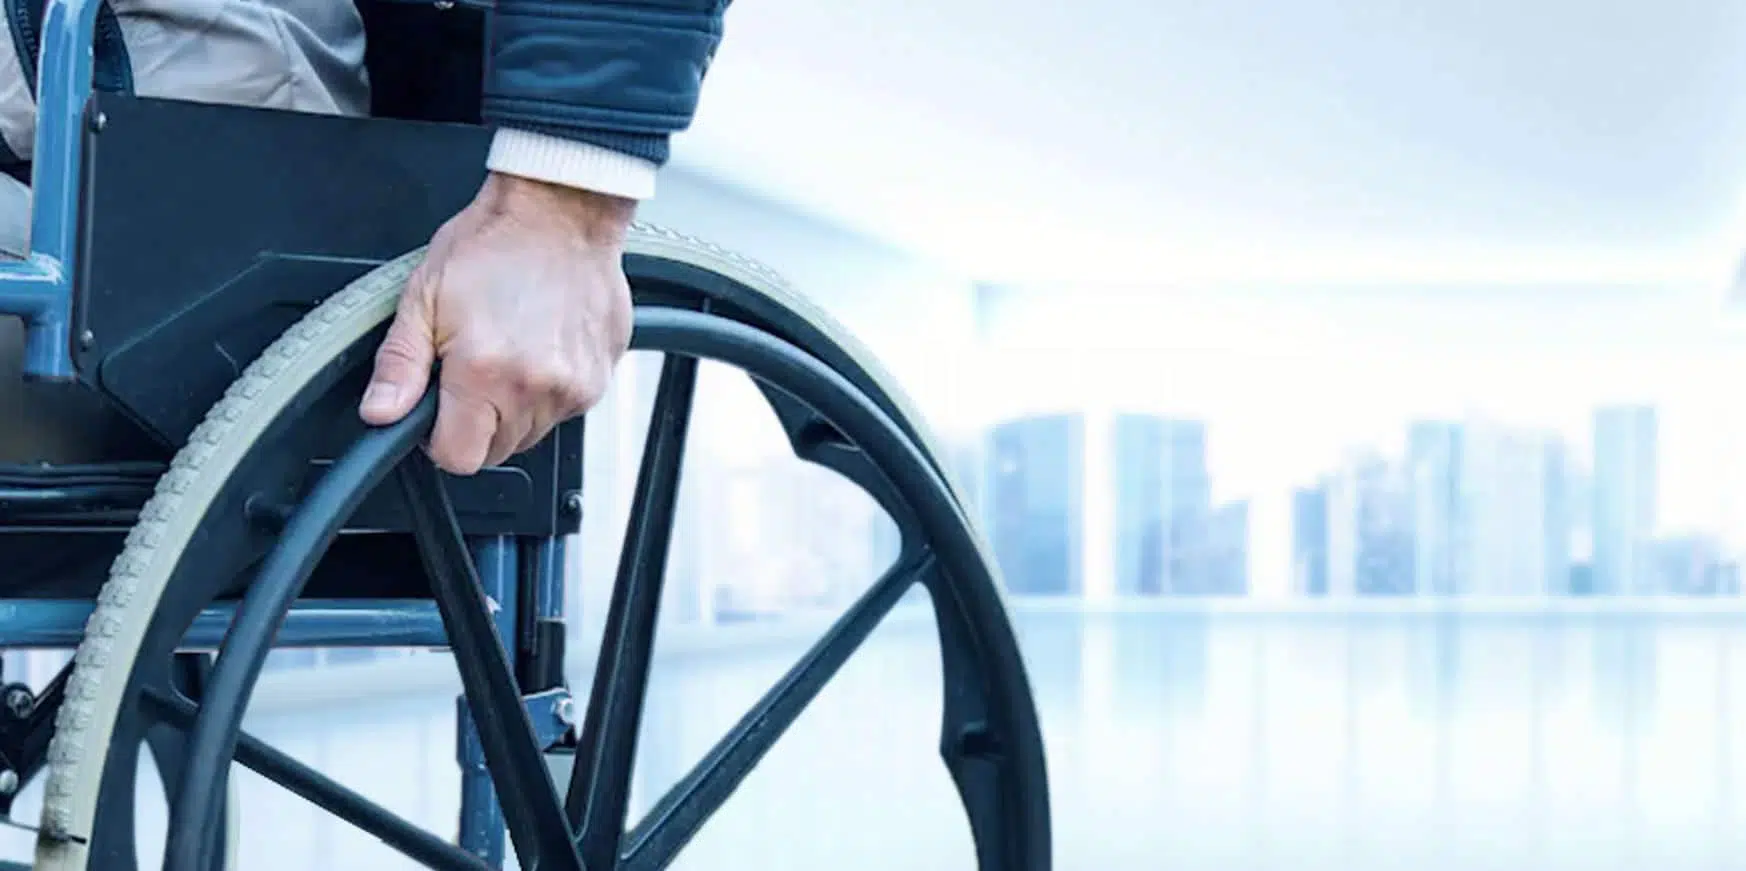 If your employer has treated you differently due to your disability, Wrongful Termination Law Group can help